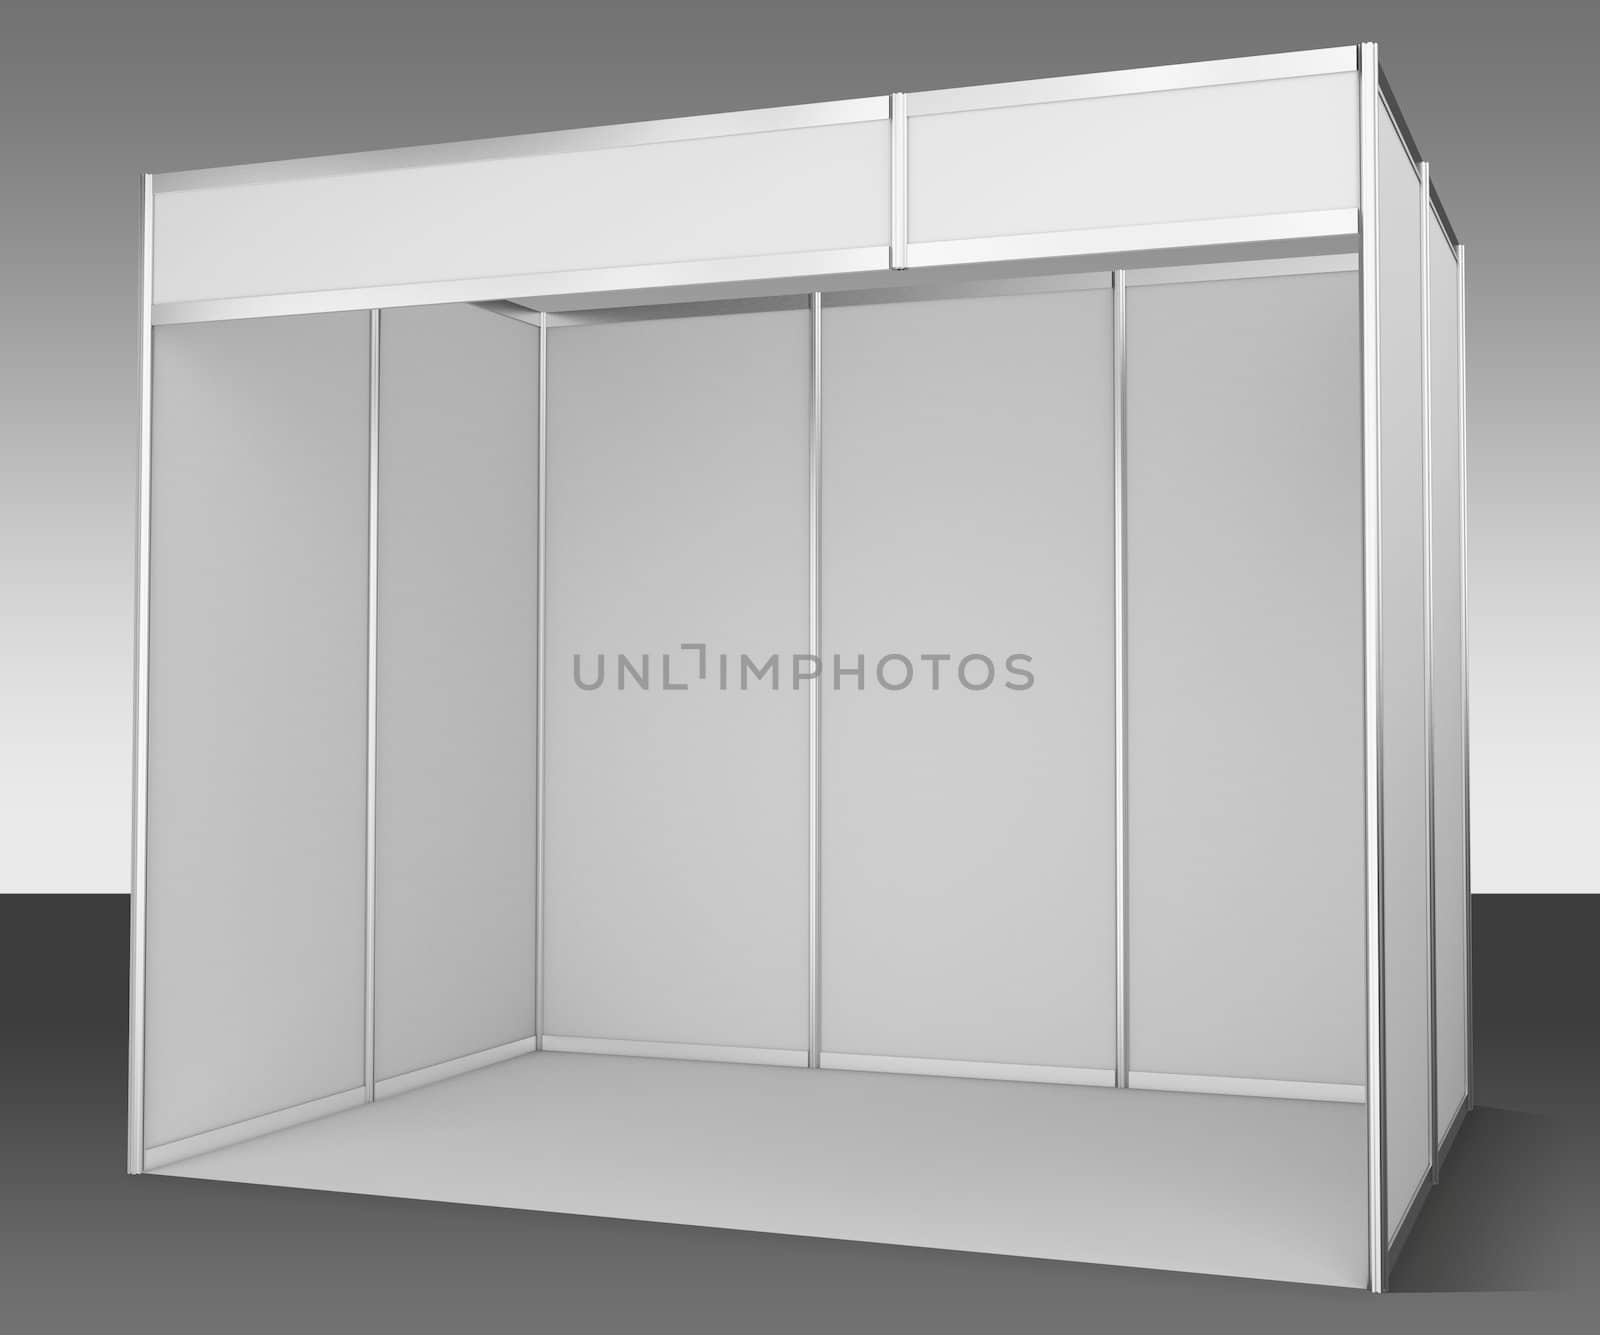 Template for easy presentation of a standard stand